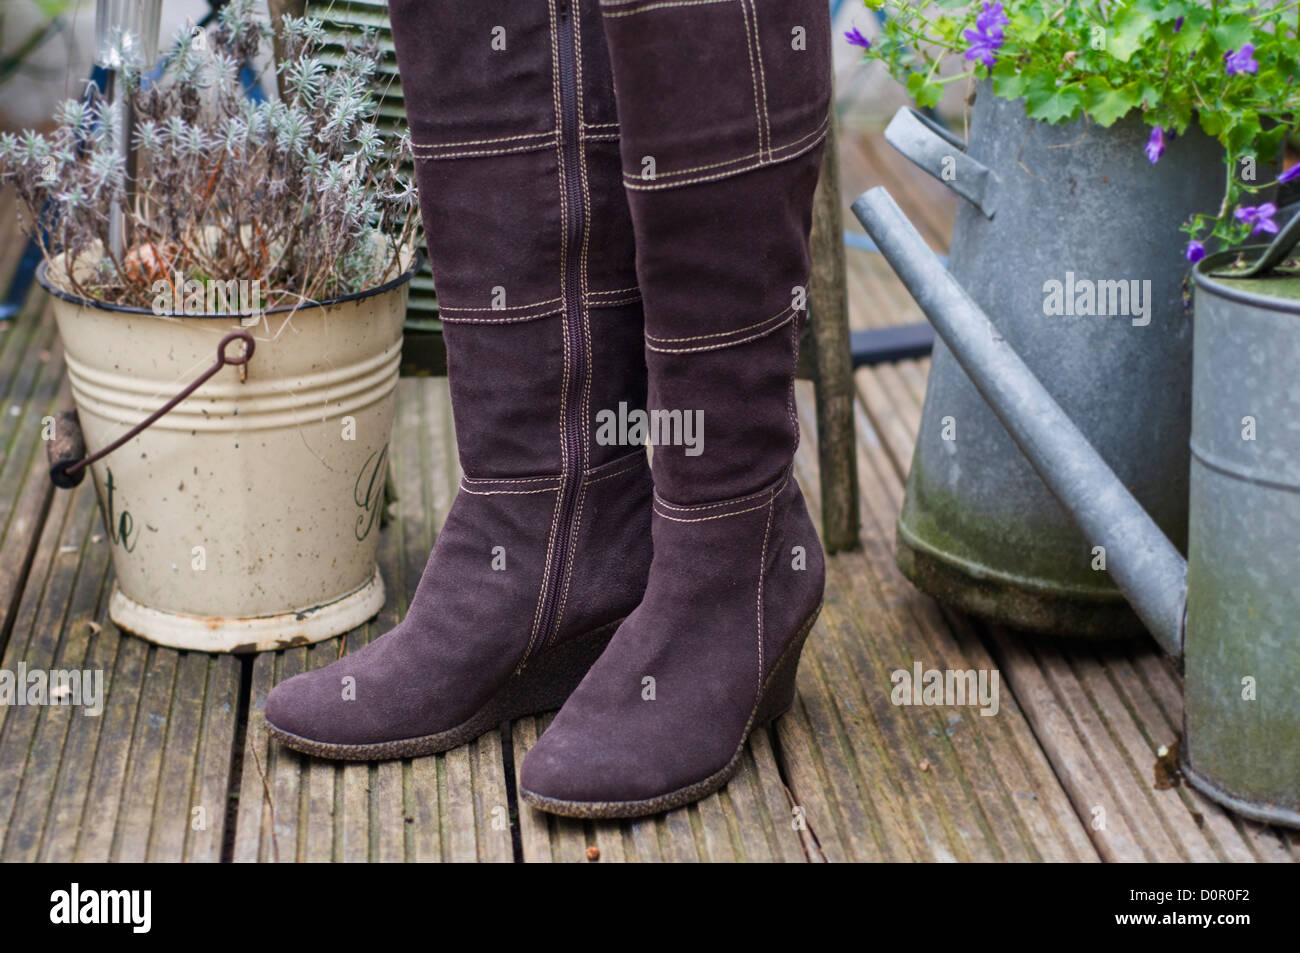 Pair of women's boots in an exterior garden setting Stock Photo